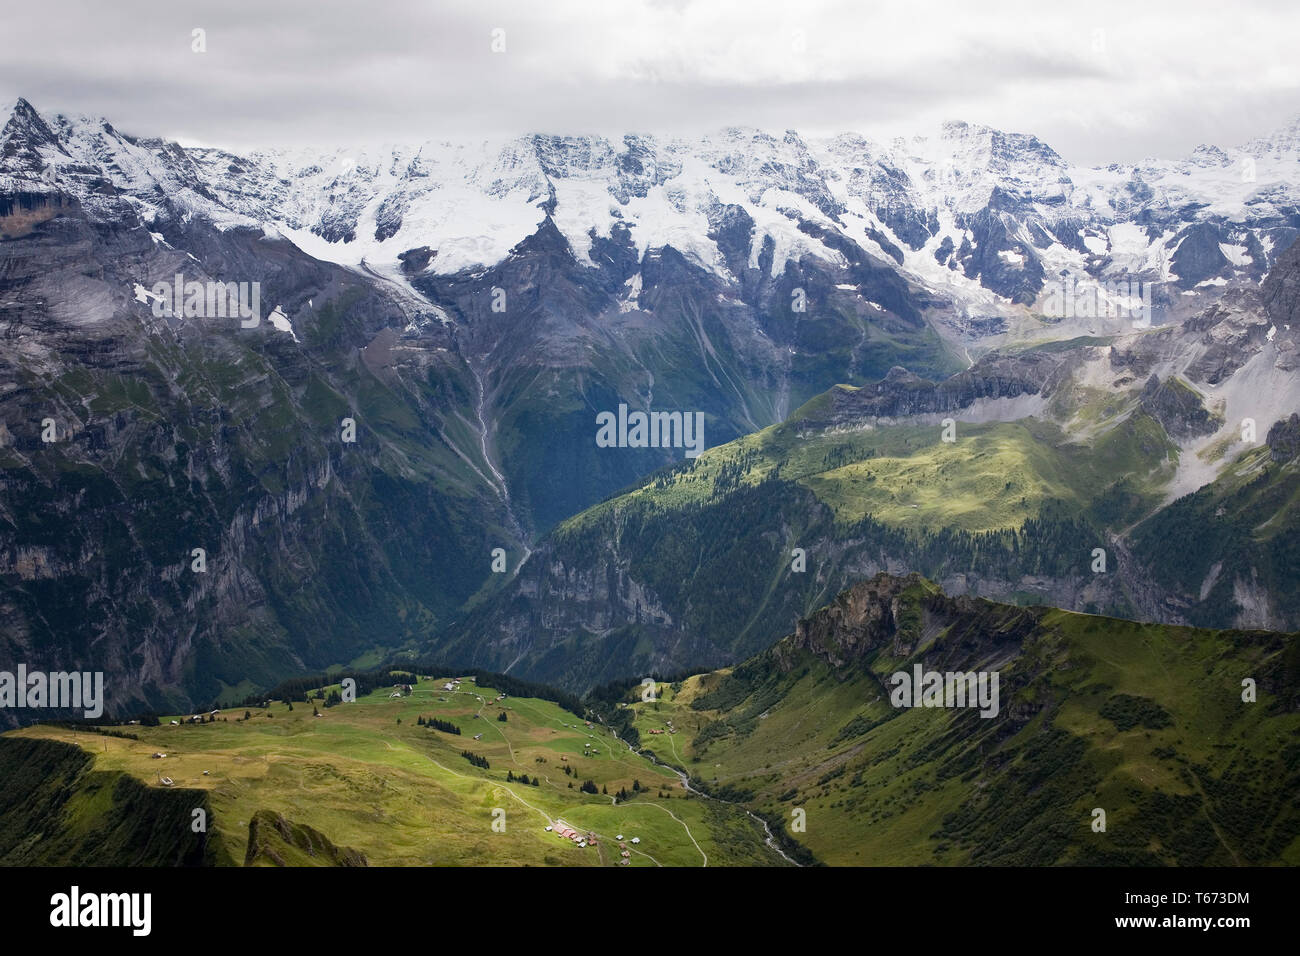 View down the Schiltal from the Birg cablecar station, with the Jungfrau Massif and the Lauterbrunnen valley beyond, Bernese Oberland, Switzerland Stock Photo